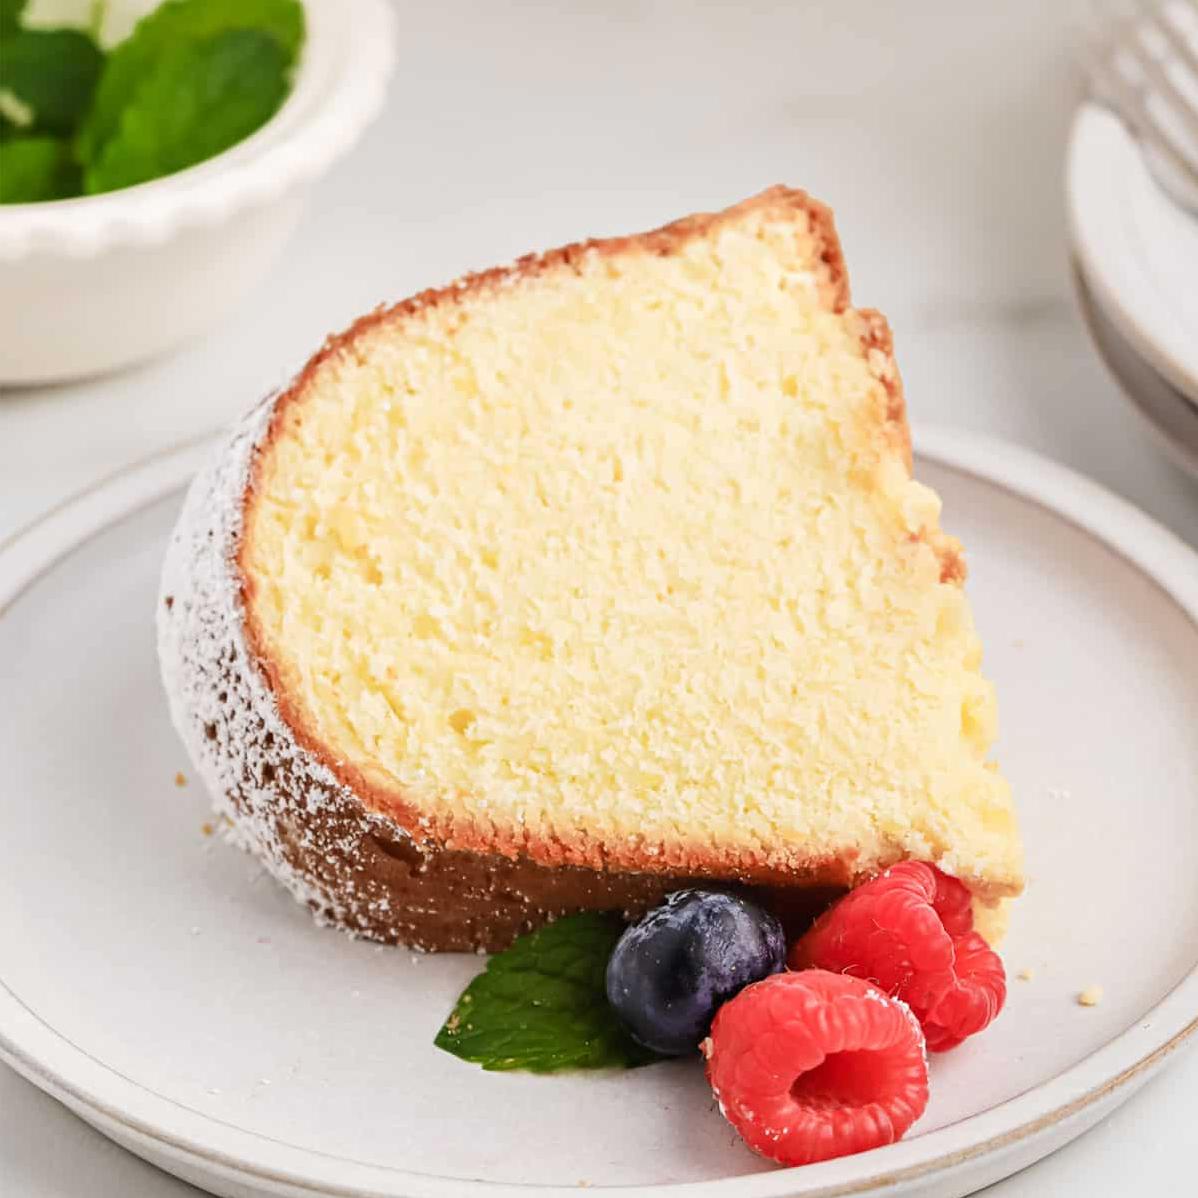 • This pound cake is so moist and delicious, it will melt in your mouth.